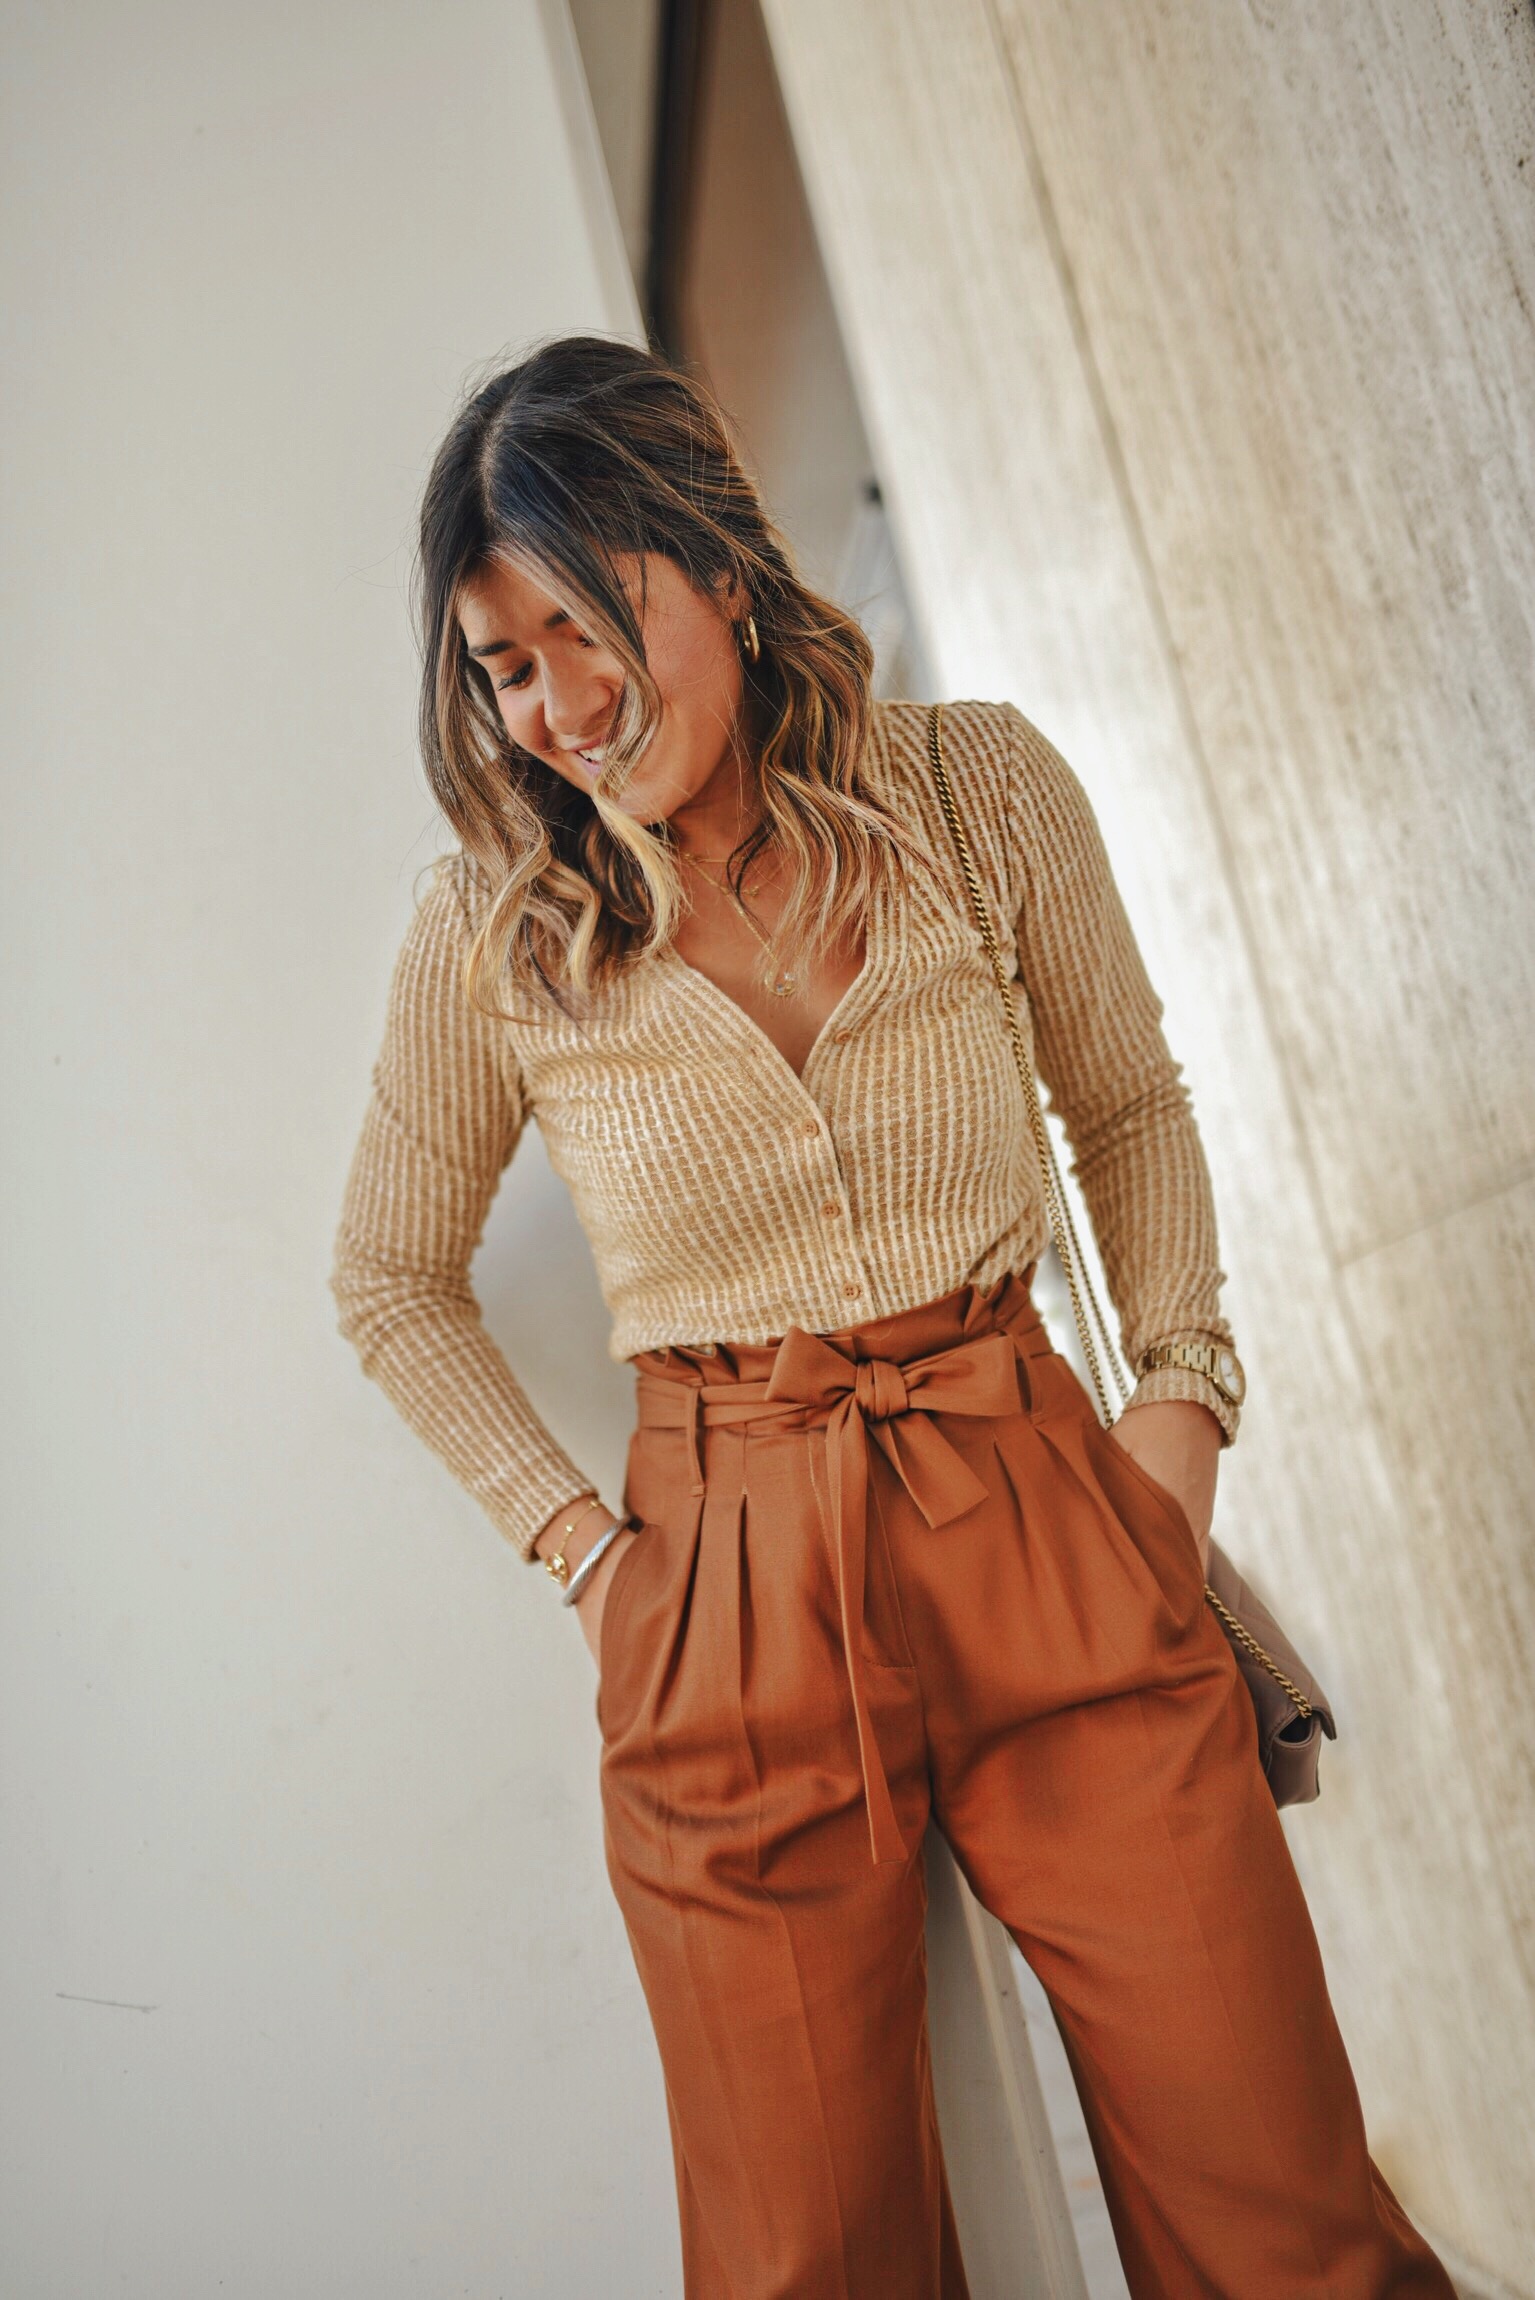 Chictalk, high waist pants, outfit inspiration | CHIC TALK